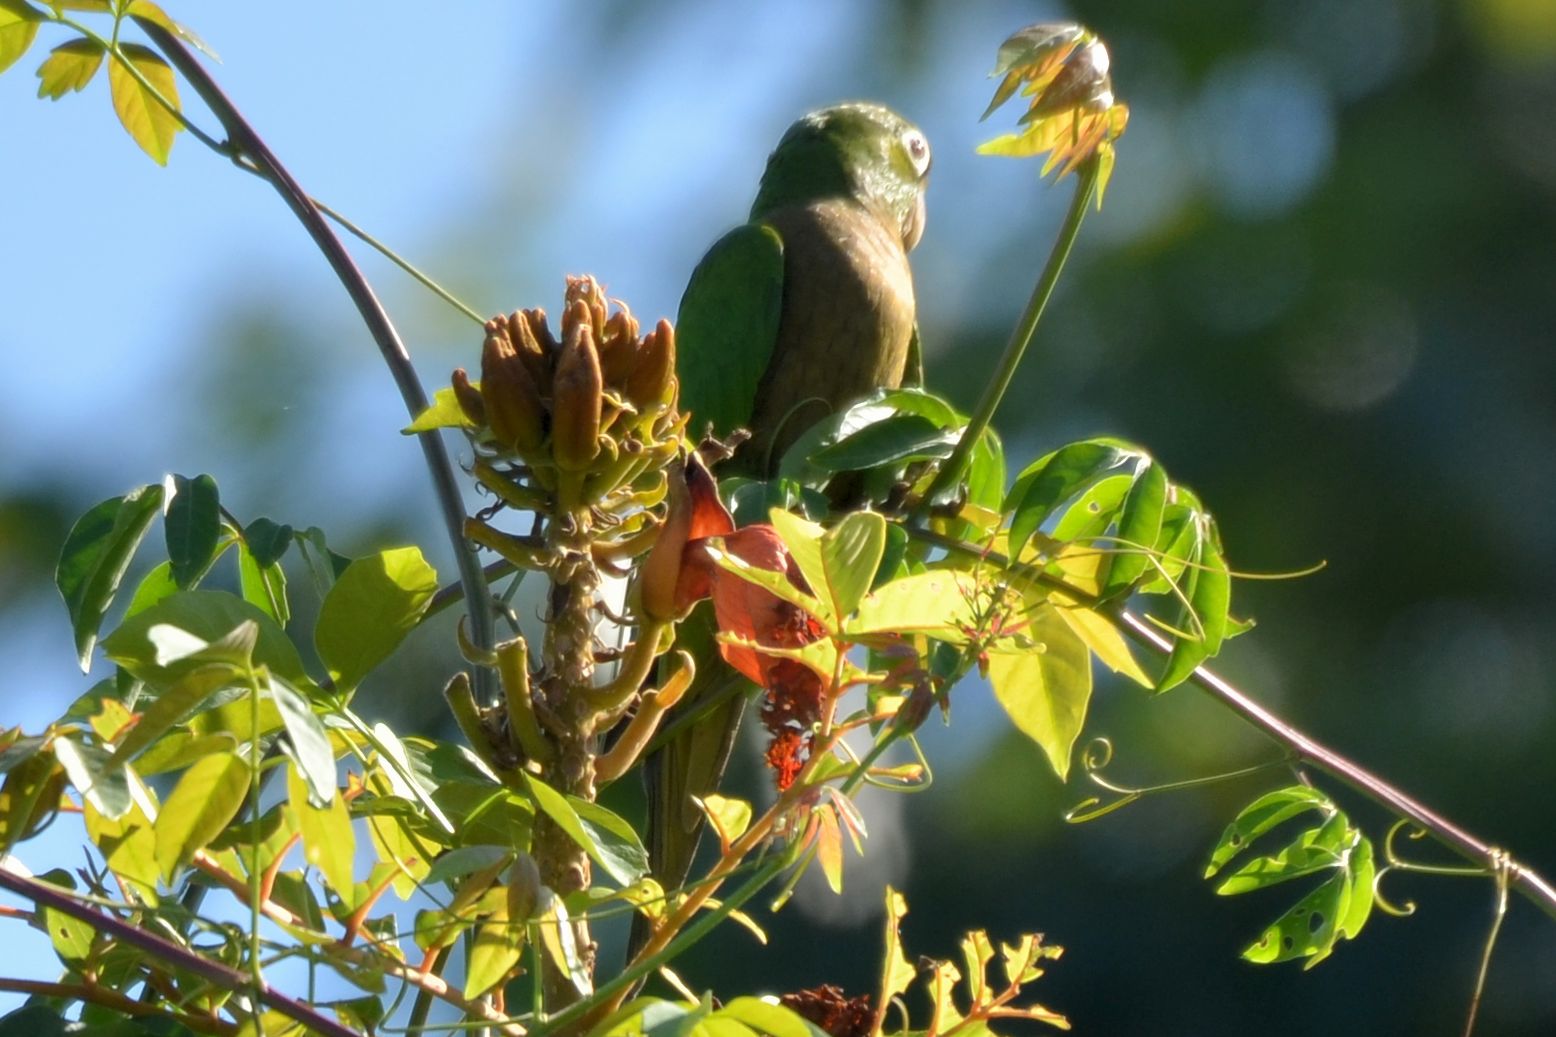 Click picture to see more Olive-throated Parakeets.